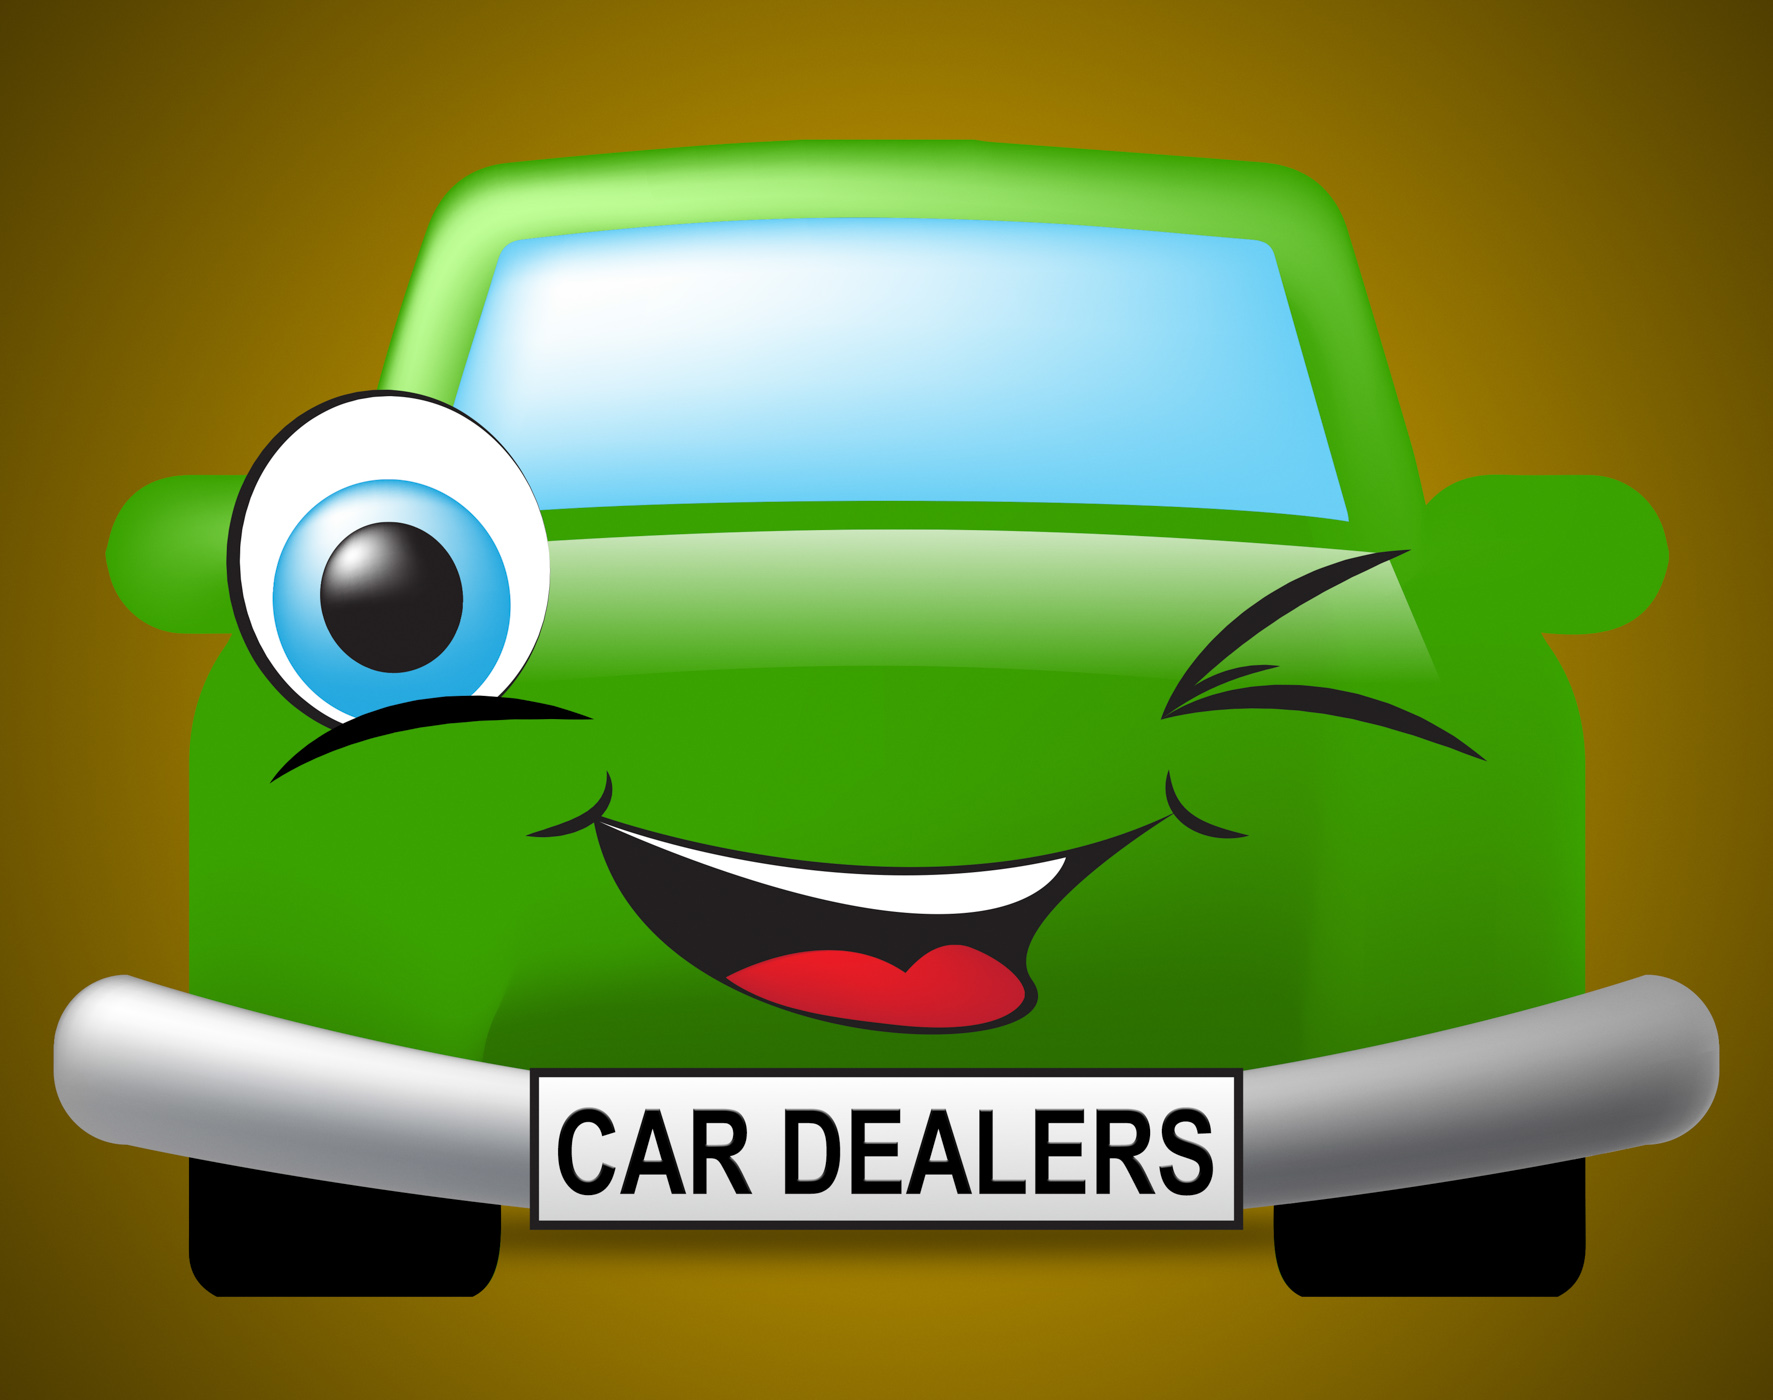 Car dealers means business organisation and automobile photo